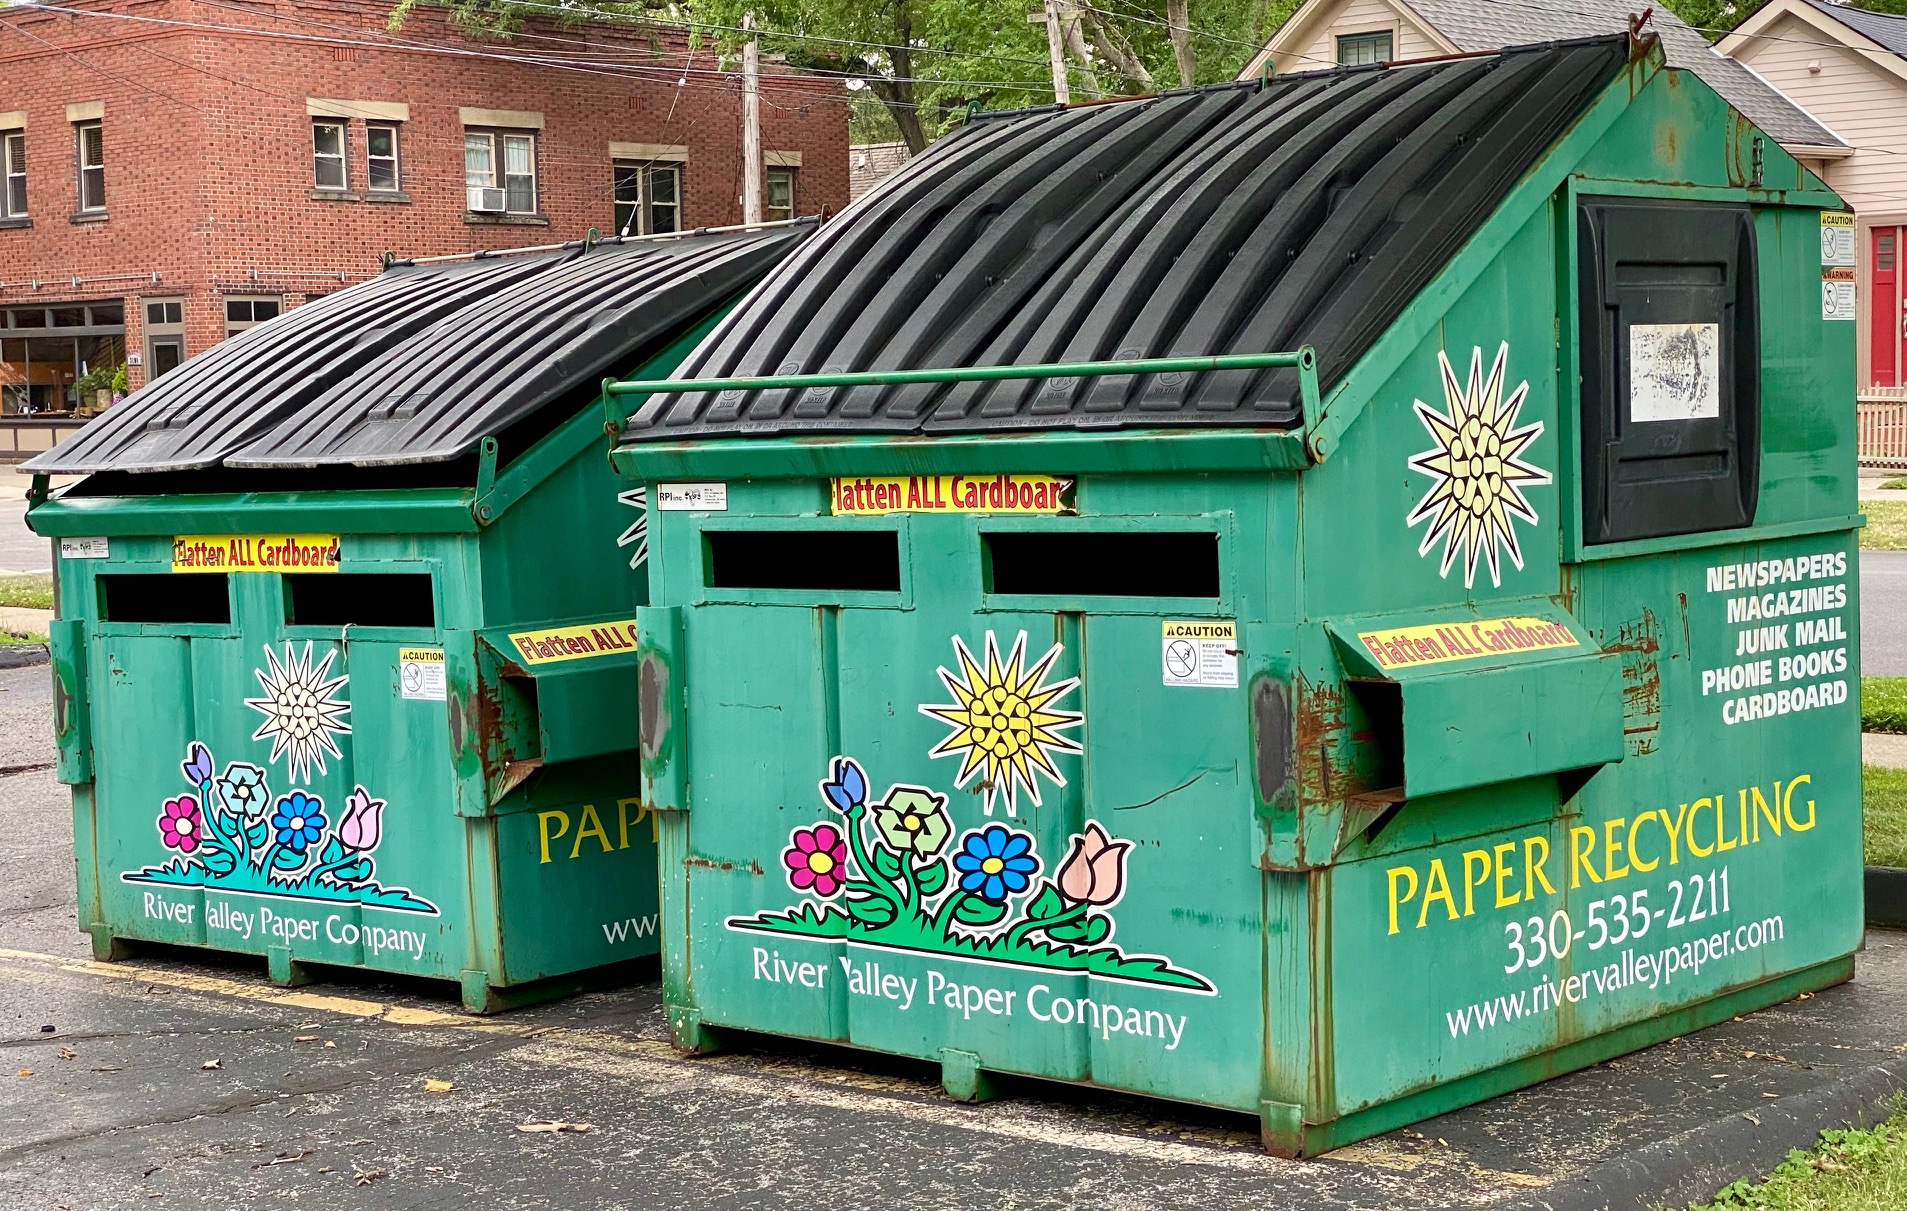 New recycling bins for 2020!